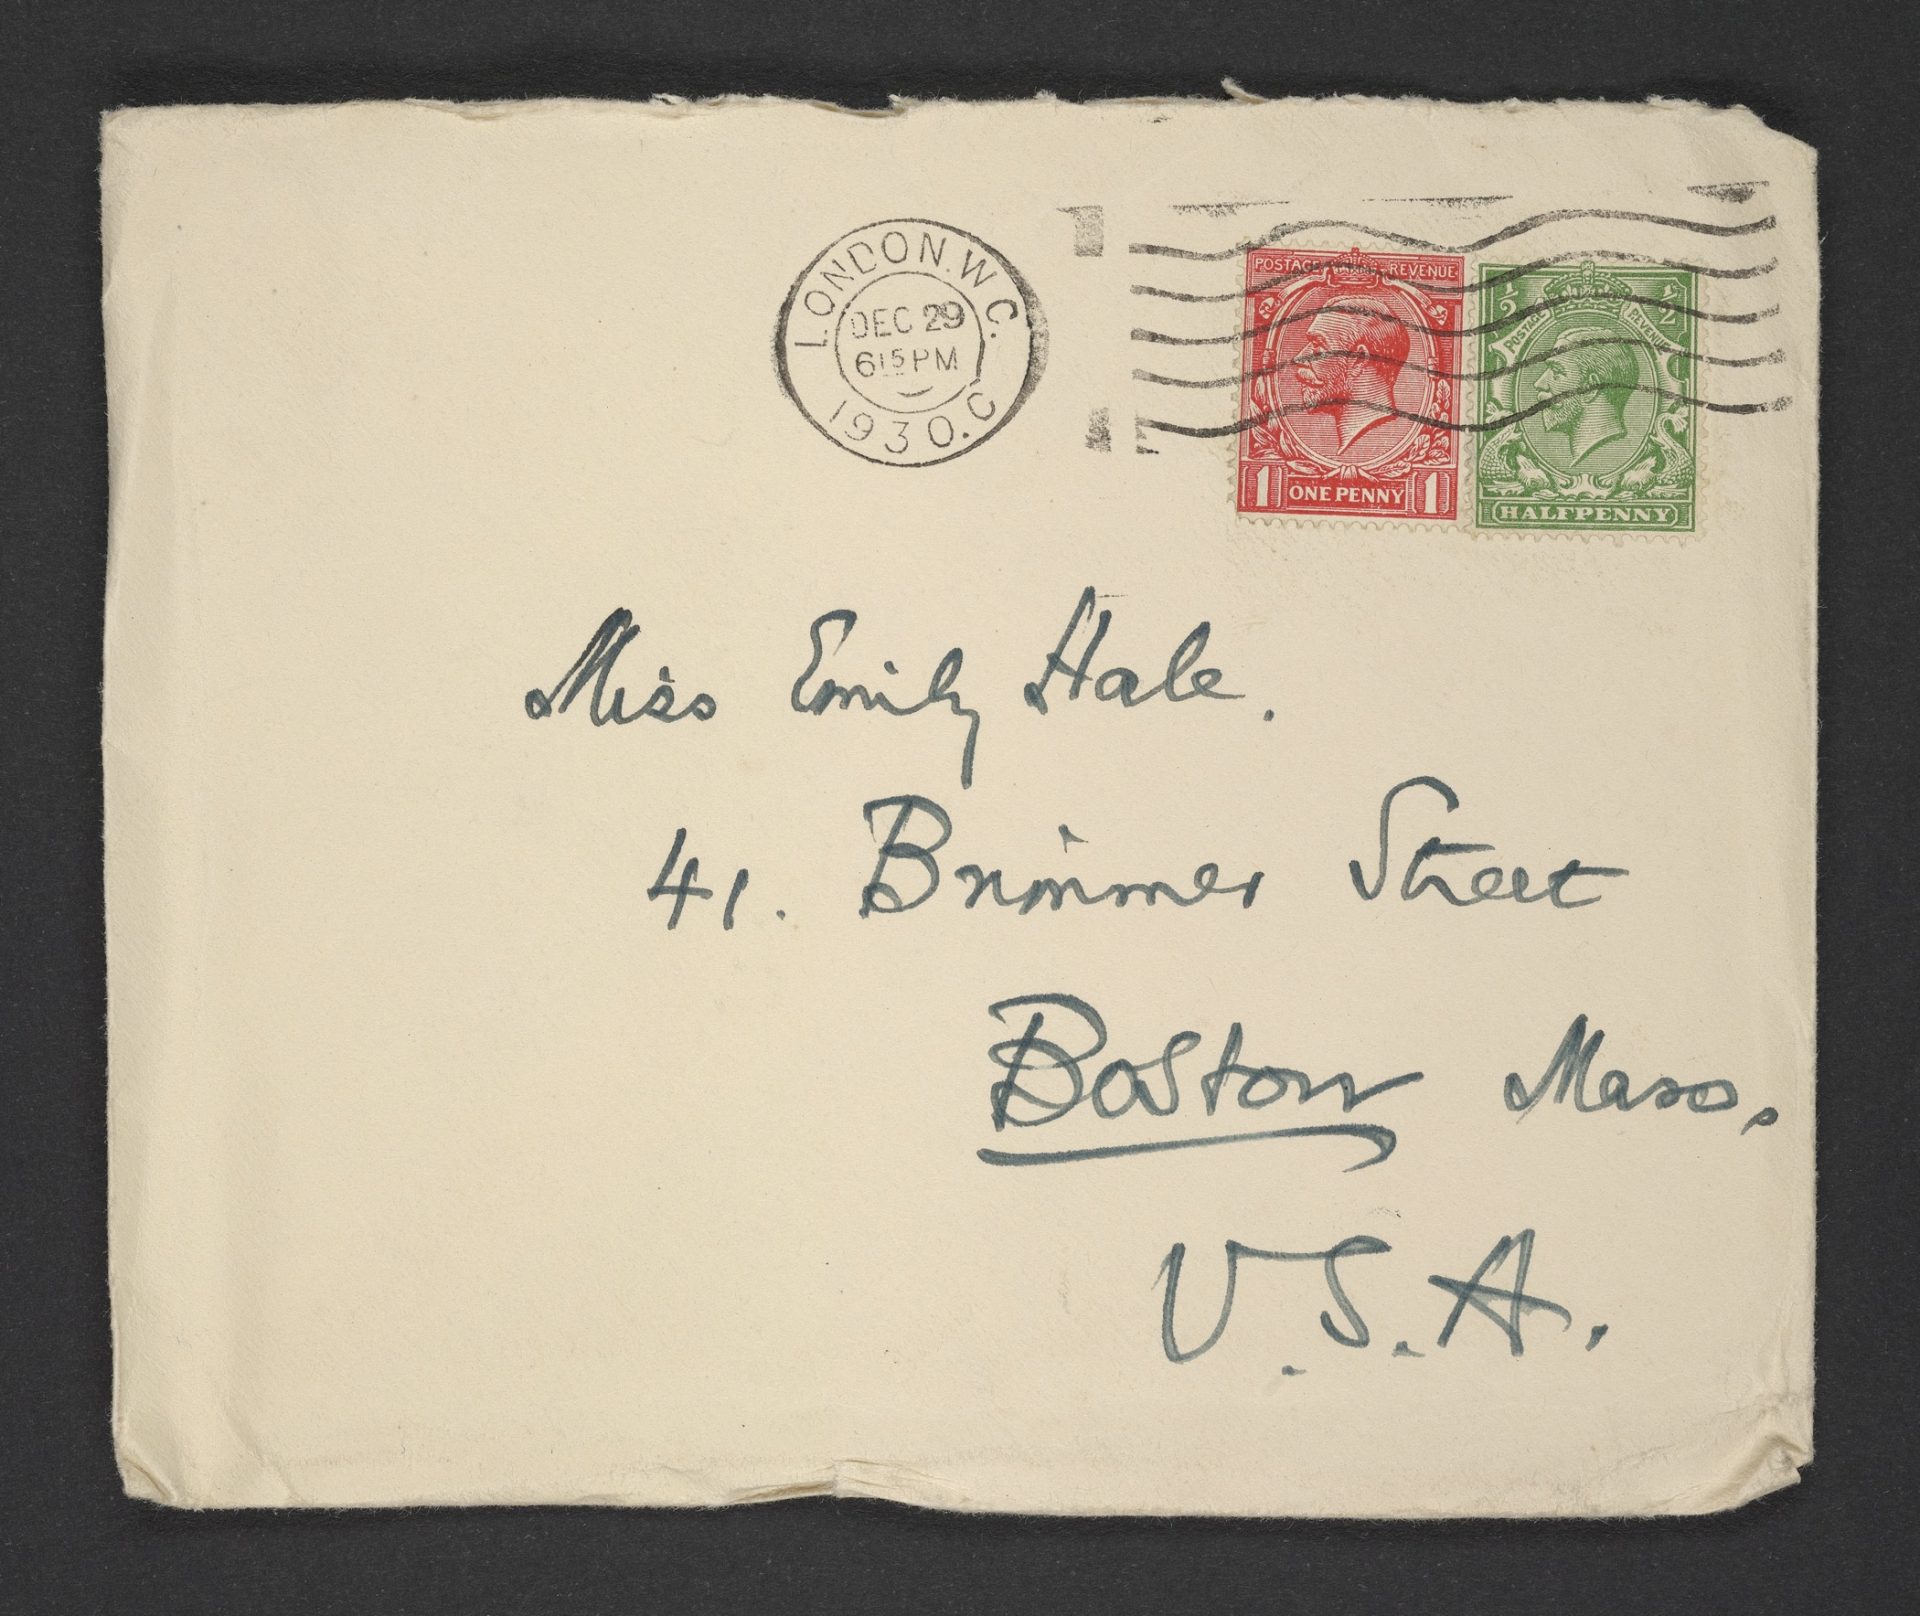 An envelope addressed to Emily Hale at 41 Brimmer Street in Boston, Massachusetts, handwritten by T.S. Eliot.